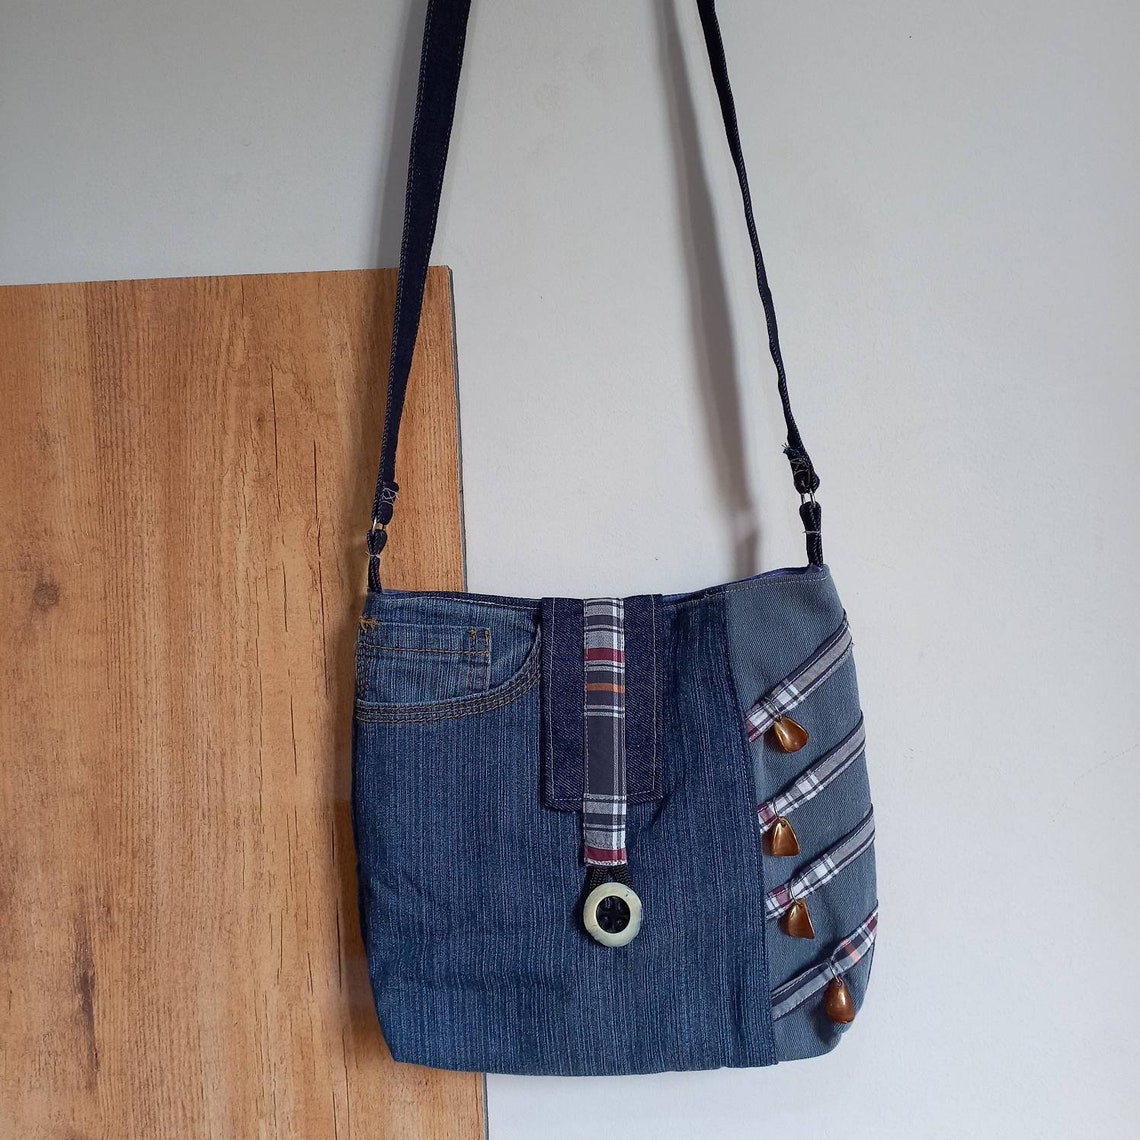 Cute Mini Patchwork Jeans Crossbody Bag With an Adjustable - Etsy